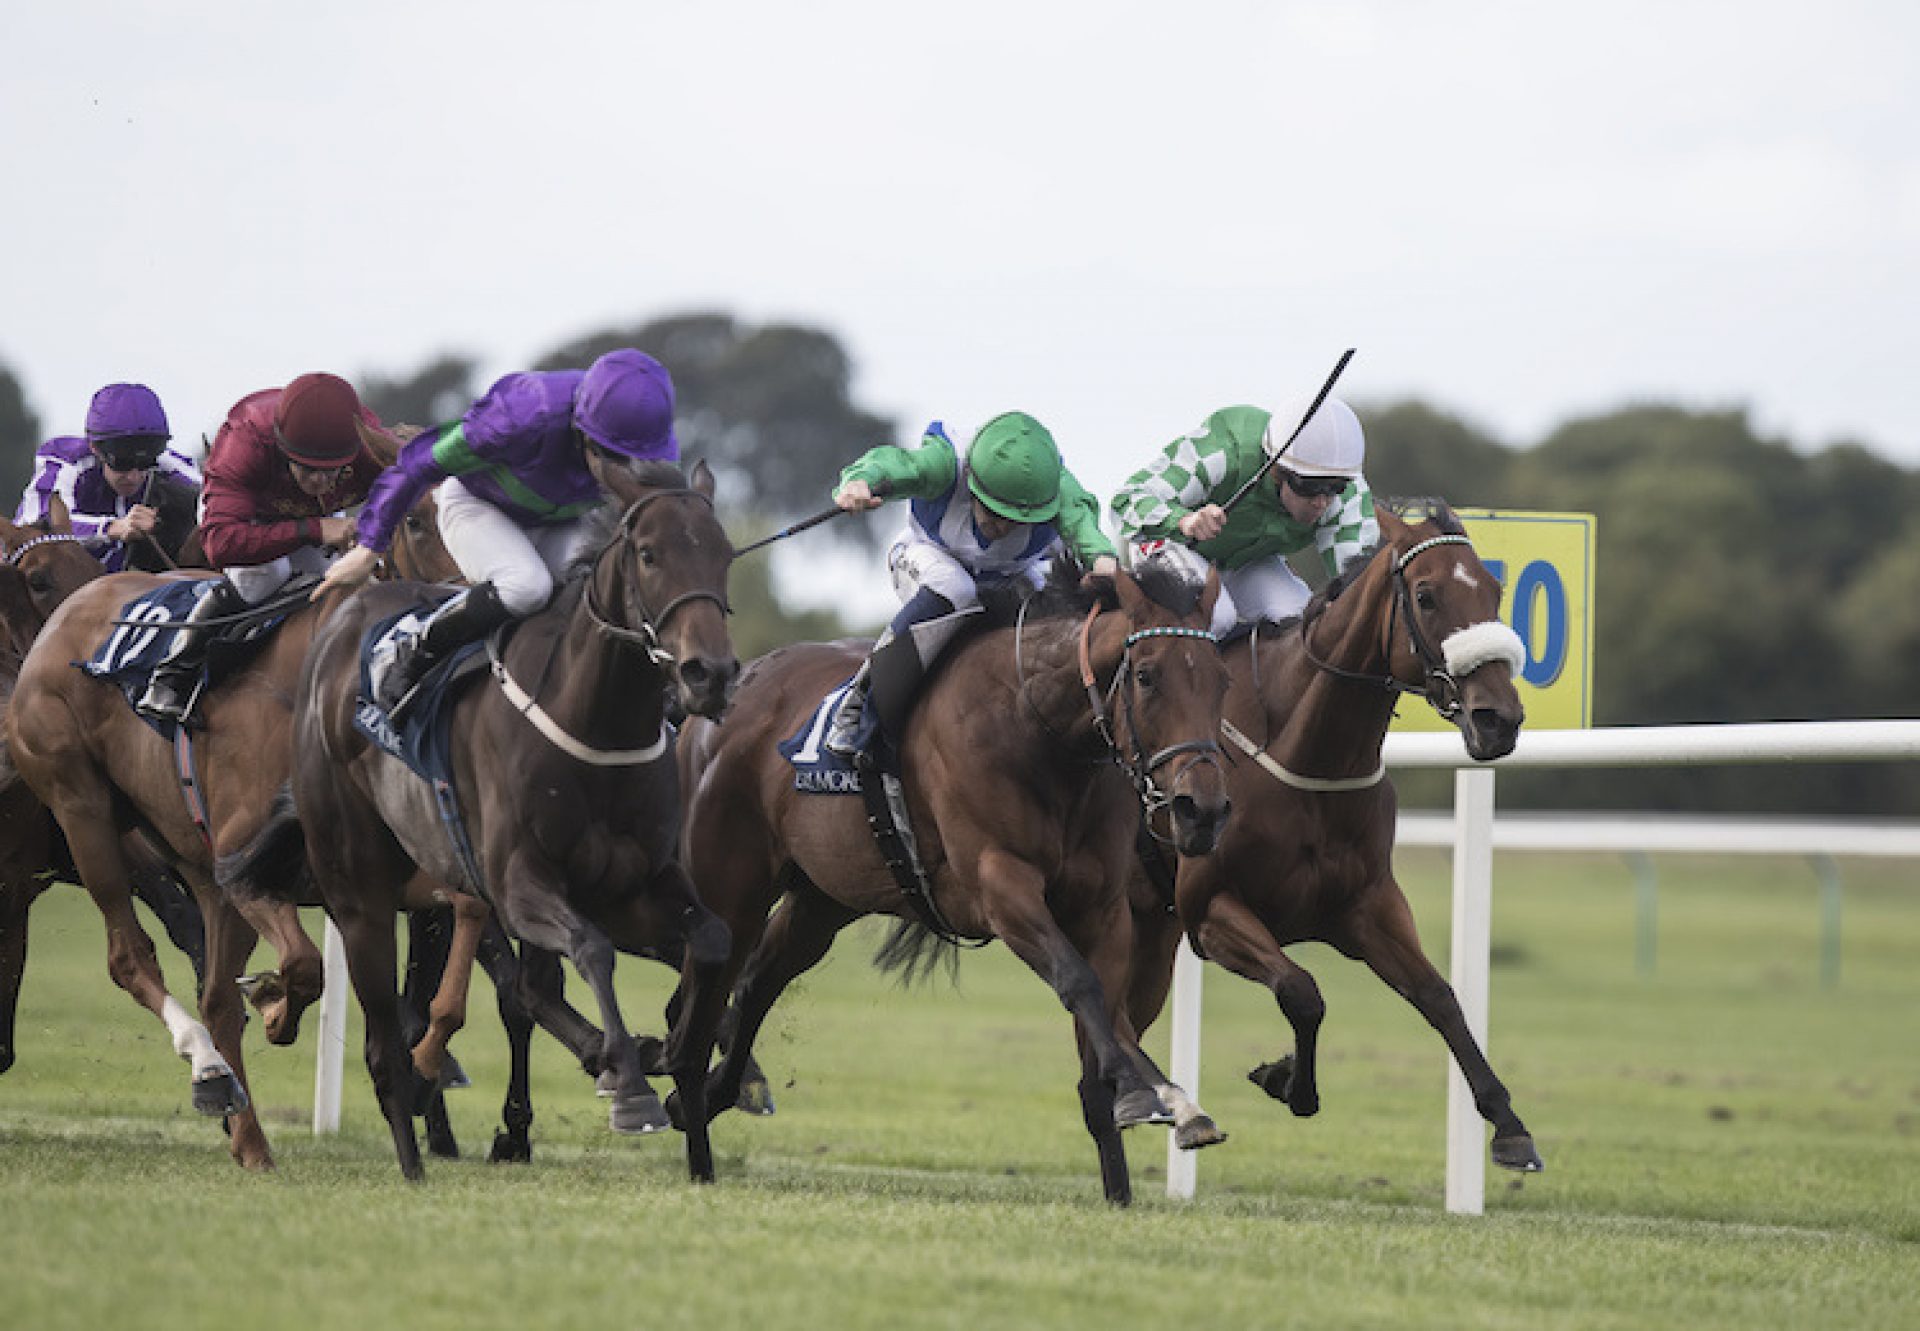 One Master (Mastercraftsman) winning the G3 Coolmore Stud Fairy Bridge Stakes at Tipperary